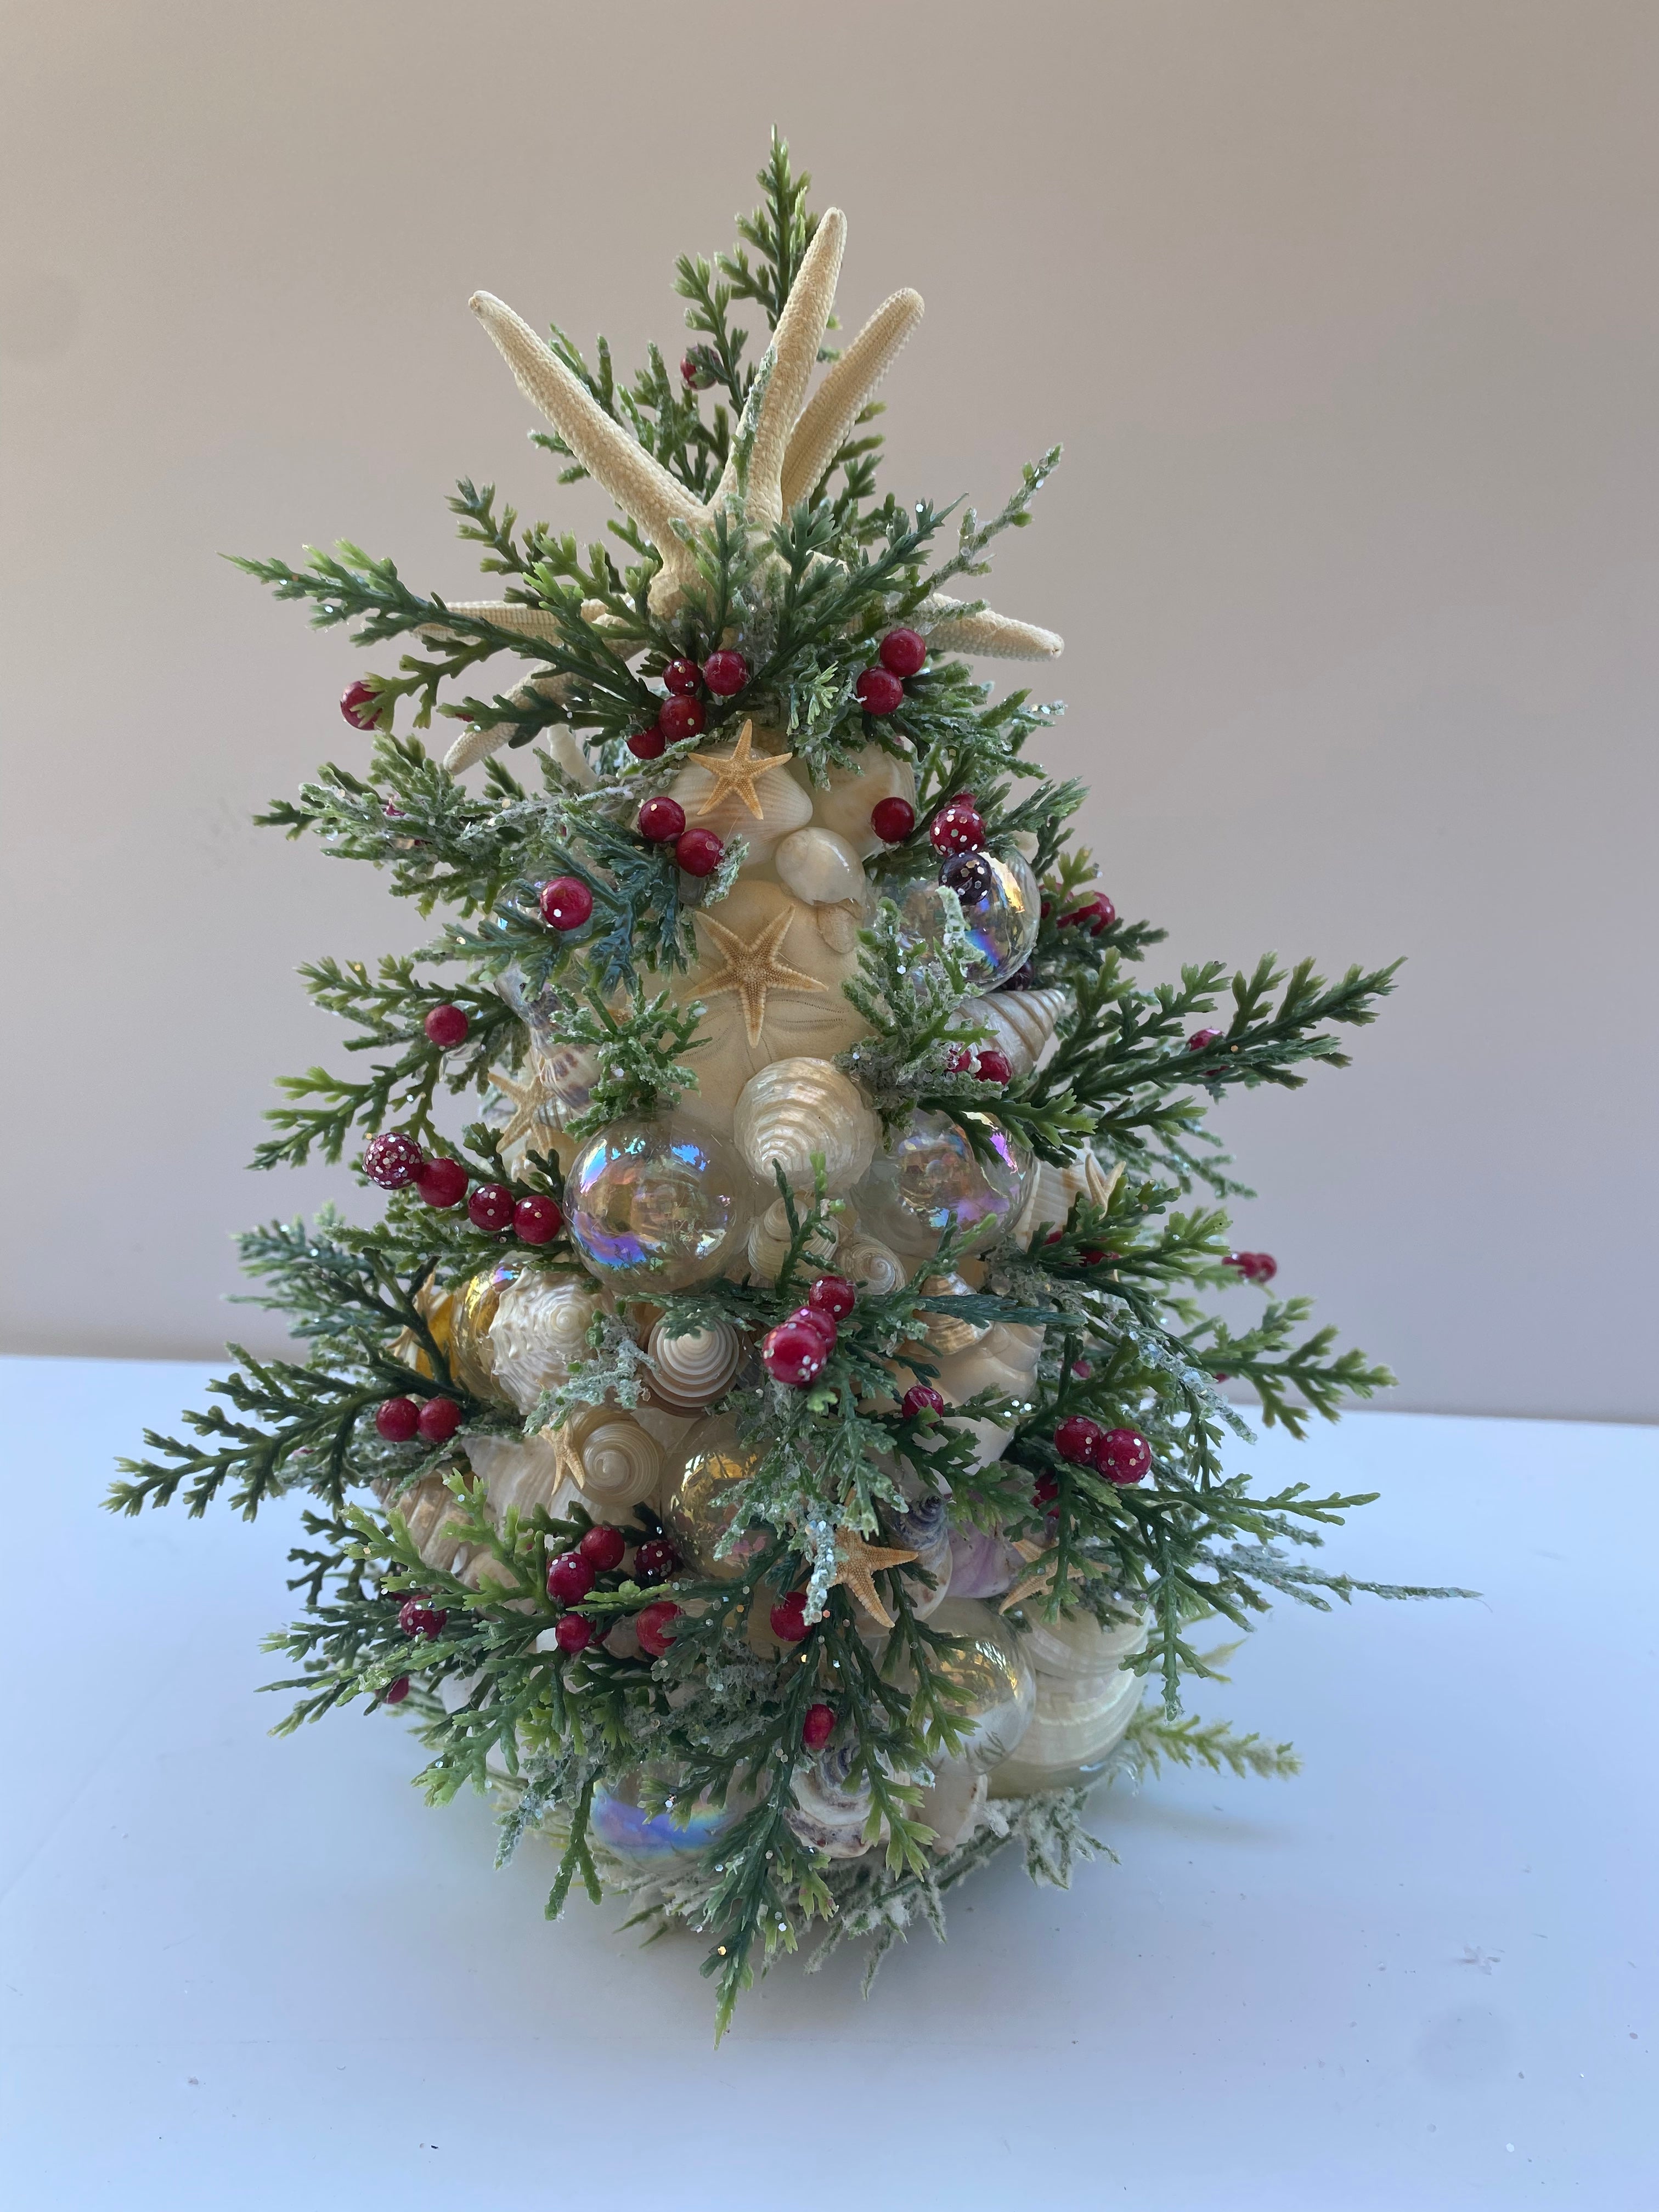 Shell Christmas tree with Red berries